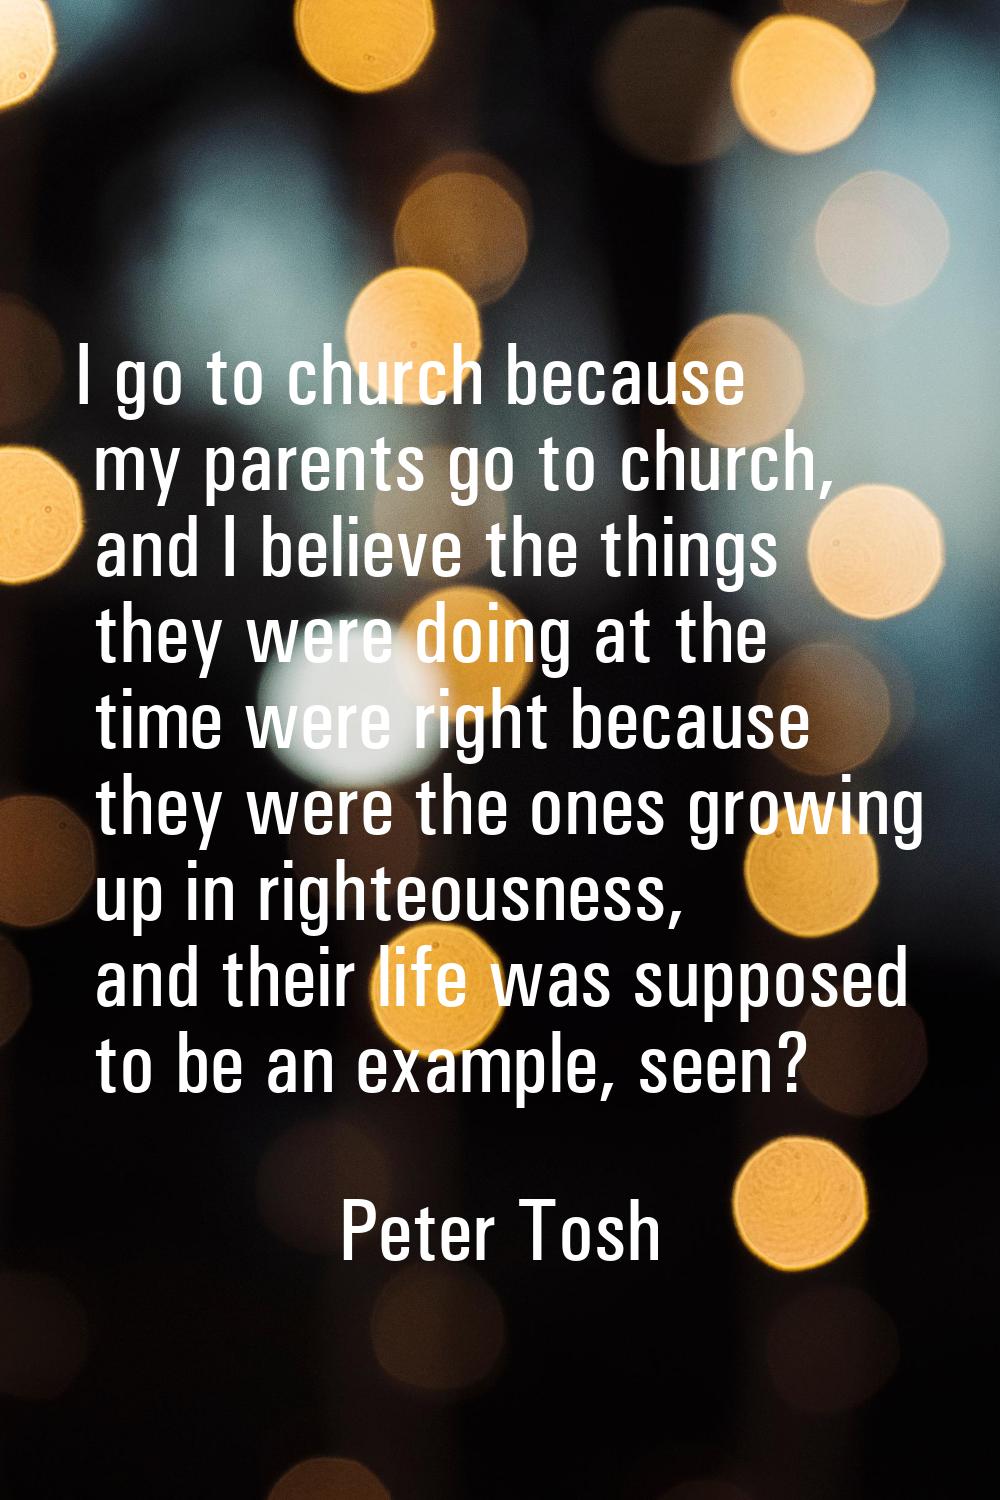 I go to church because my parents go to church, and I believe the things they were doing at the tim